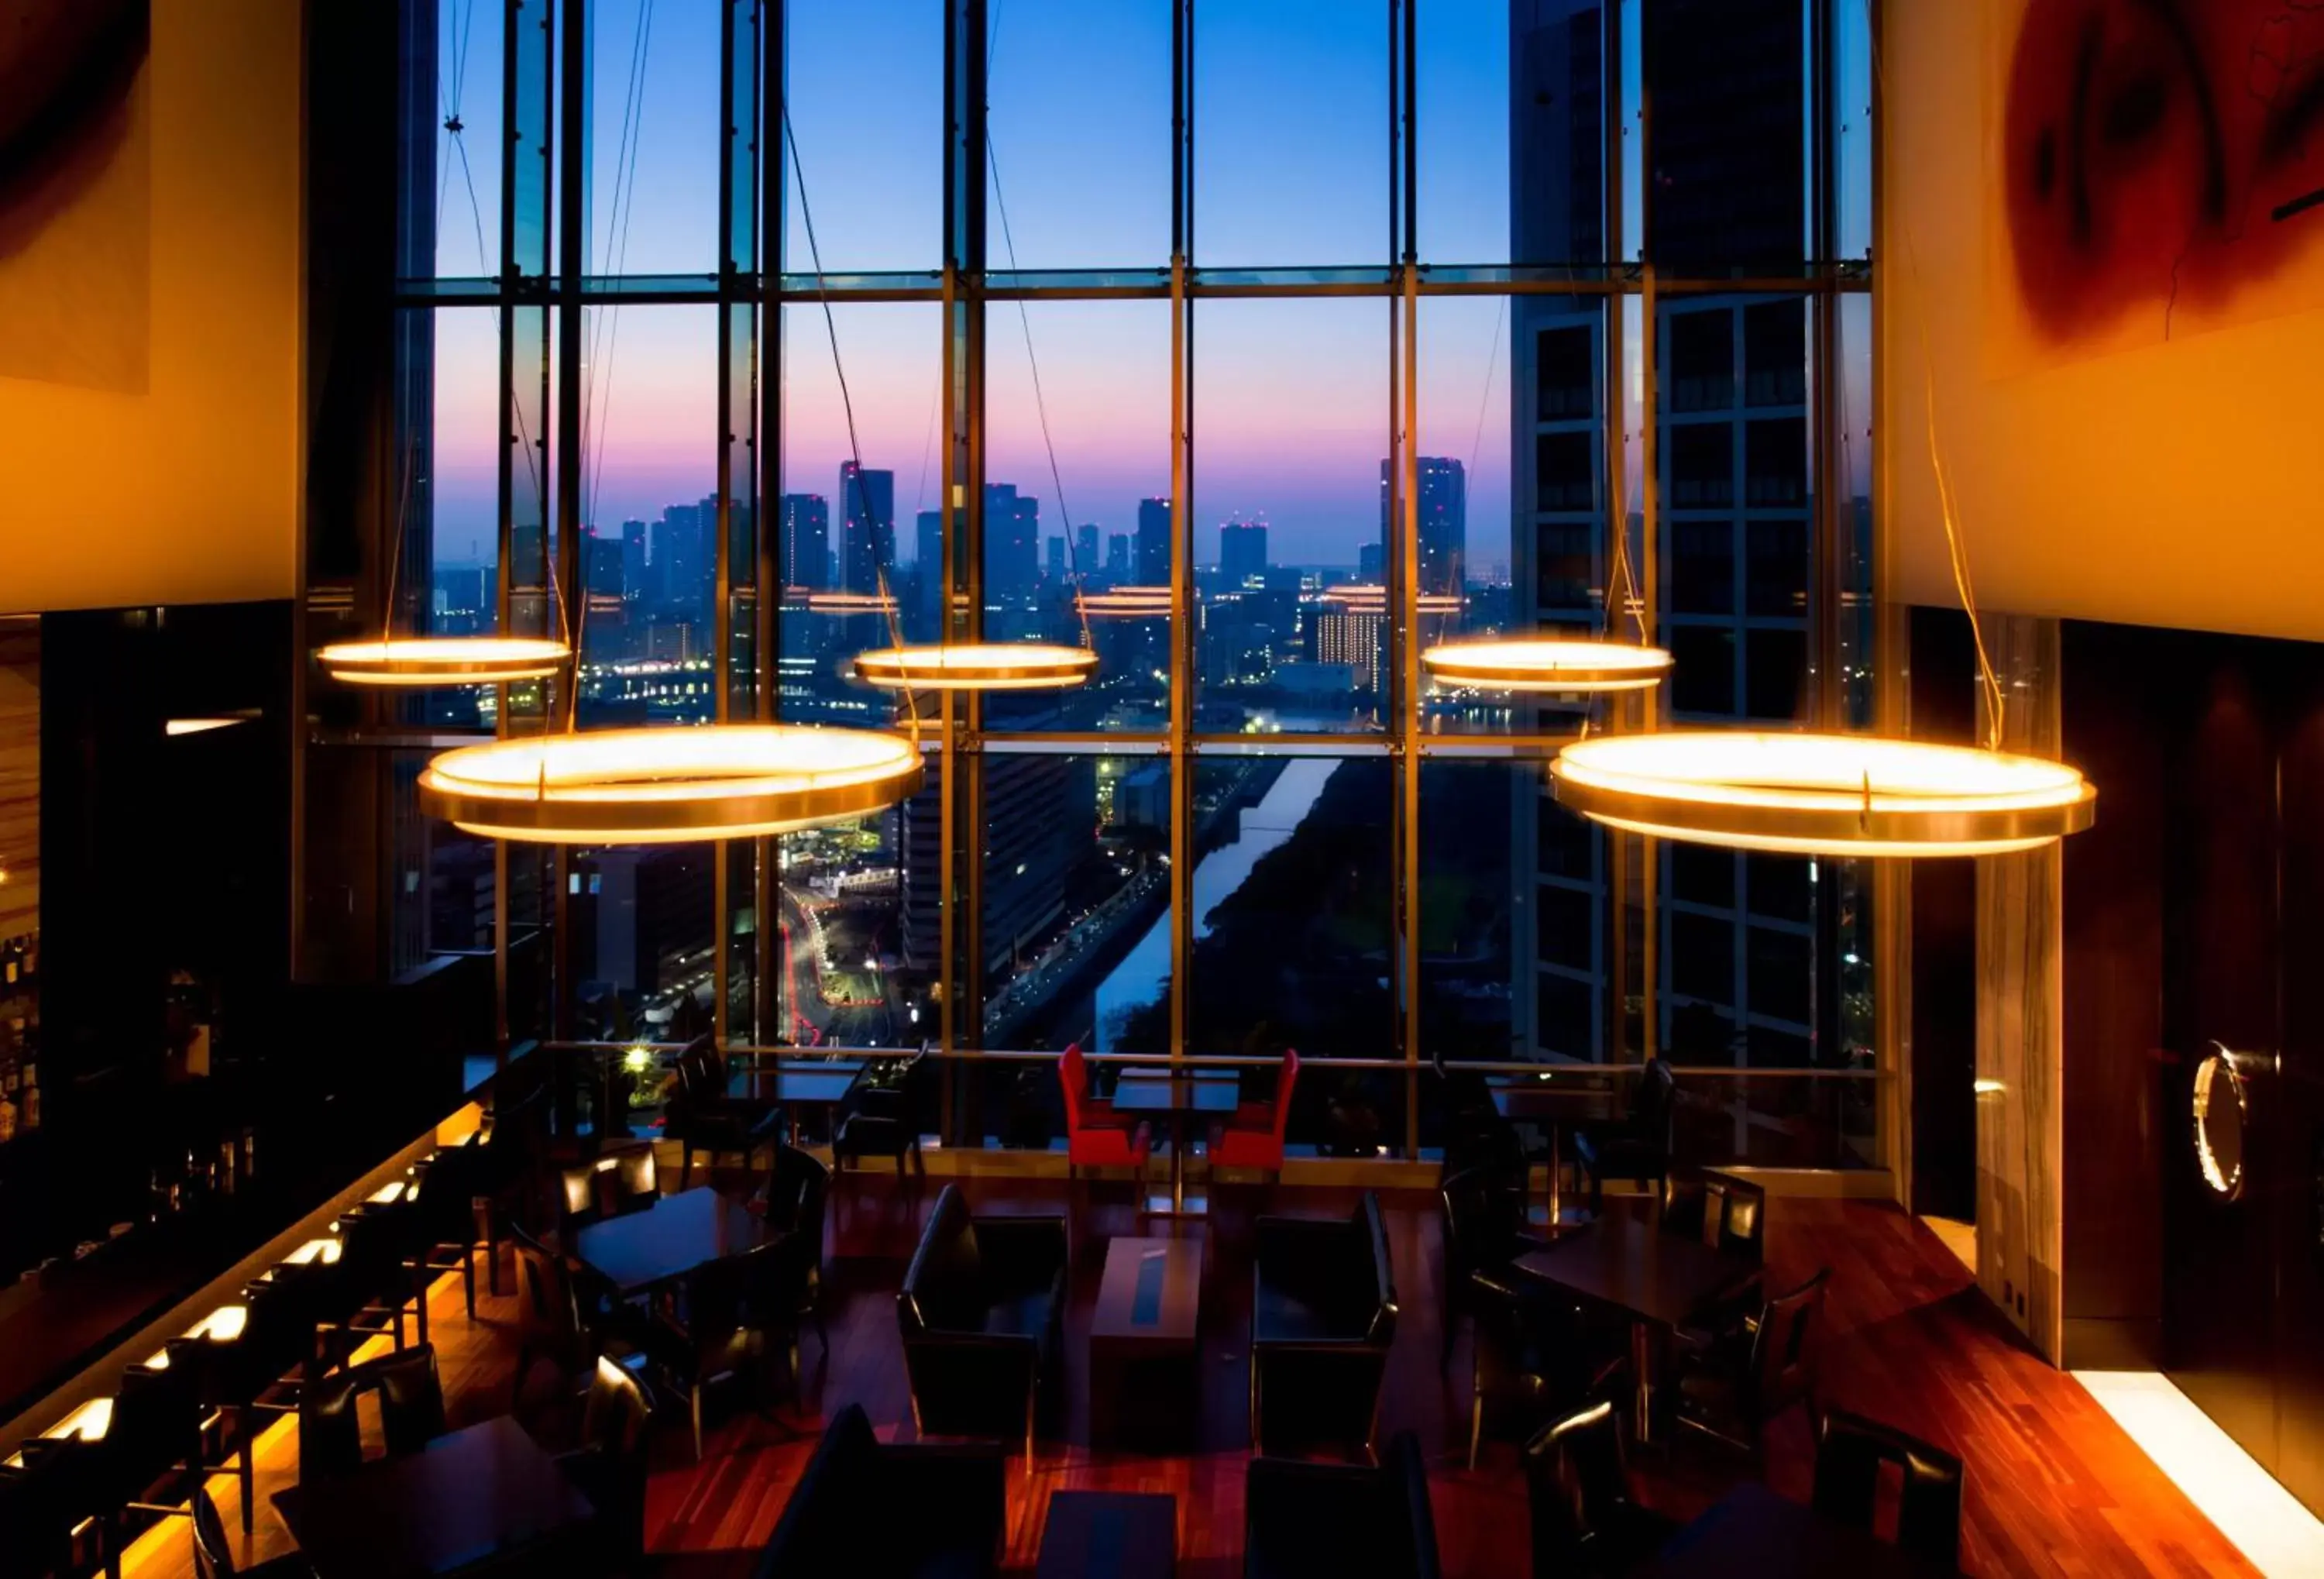 Lobby or reception in Royal Park Hotel The Shiodome, Tokyo